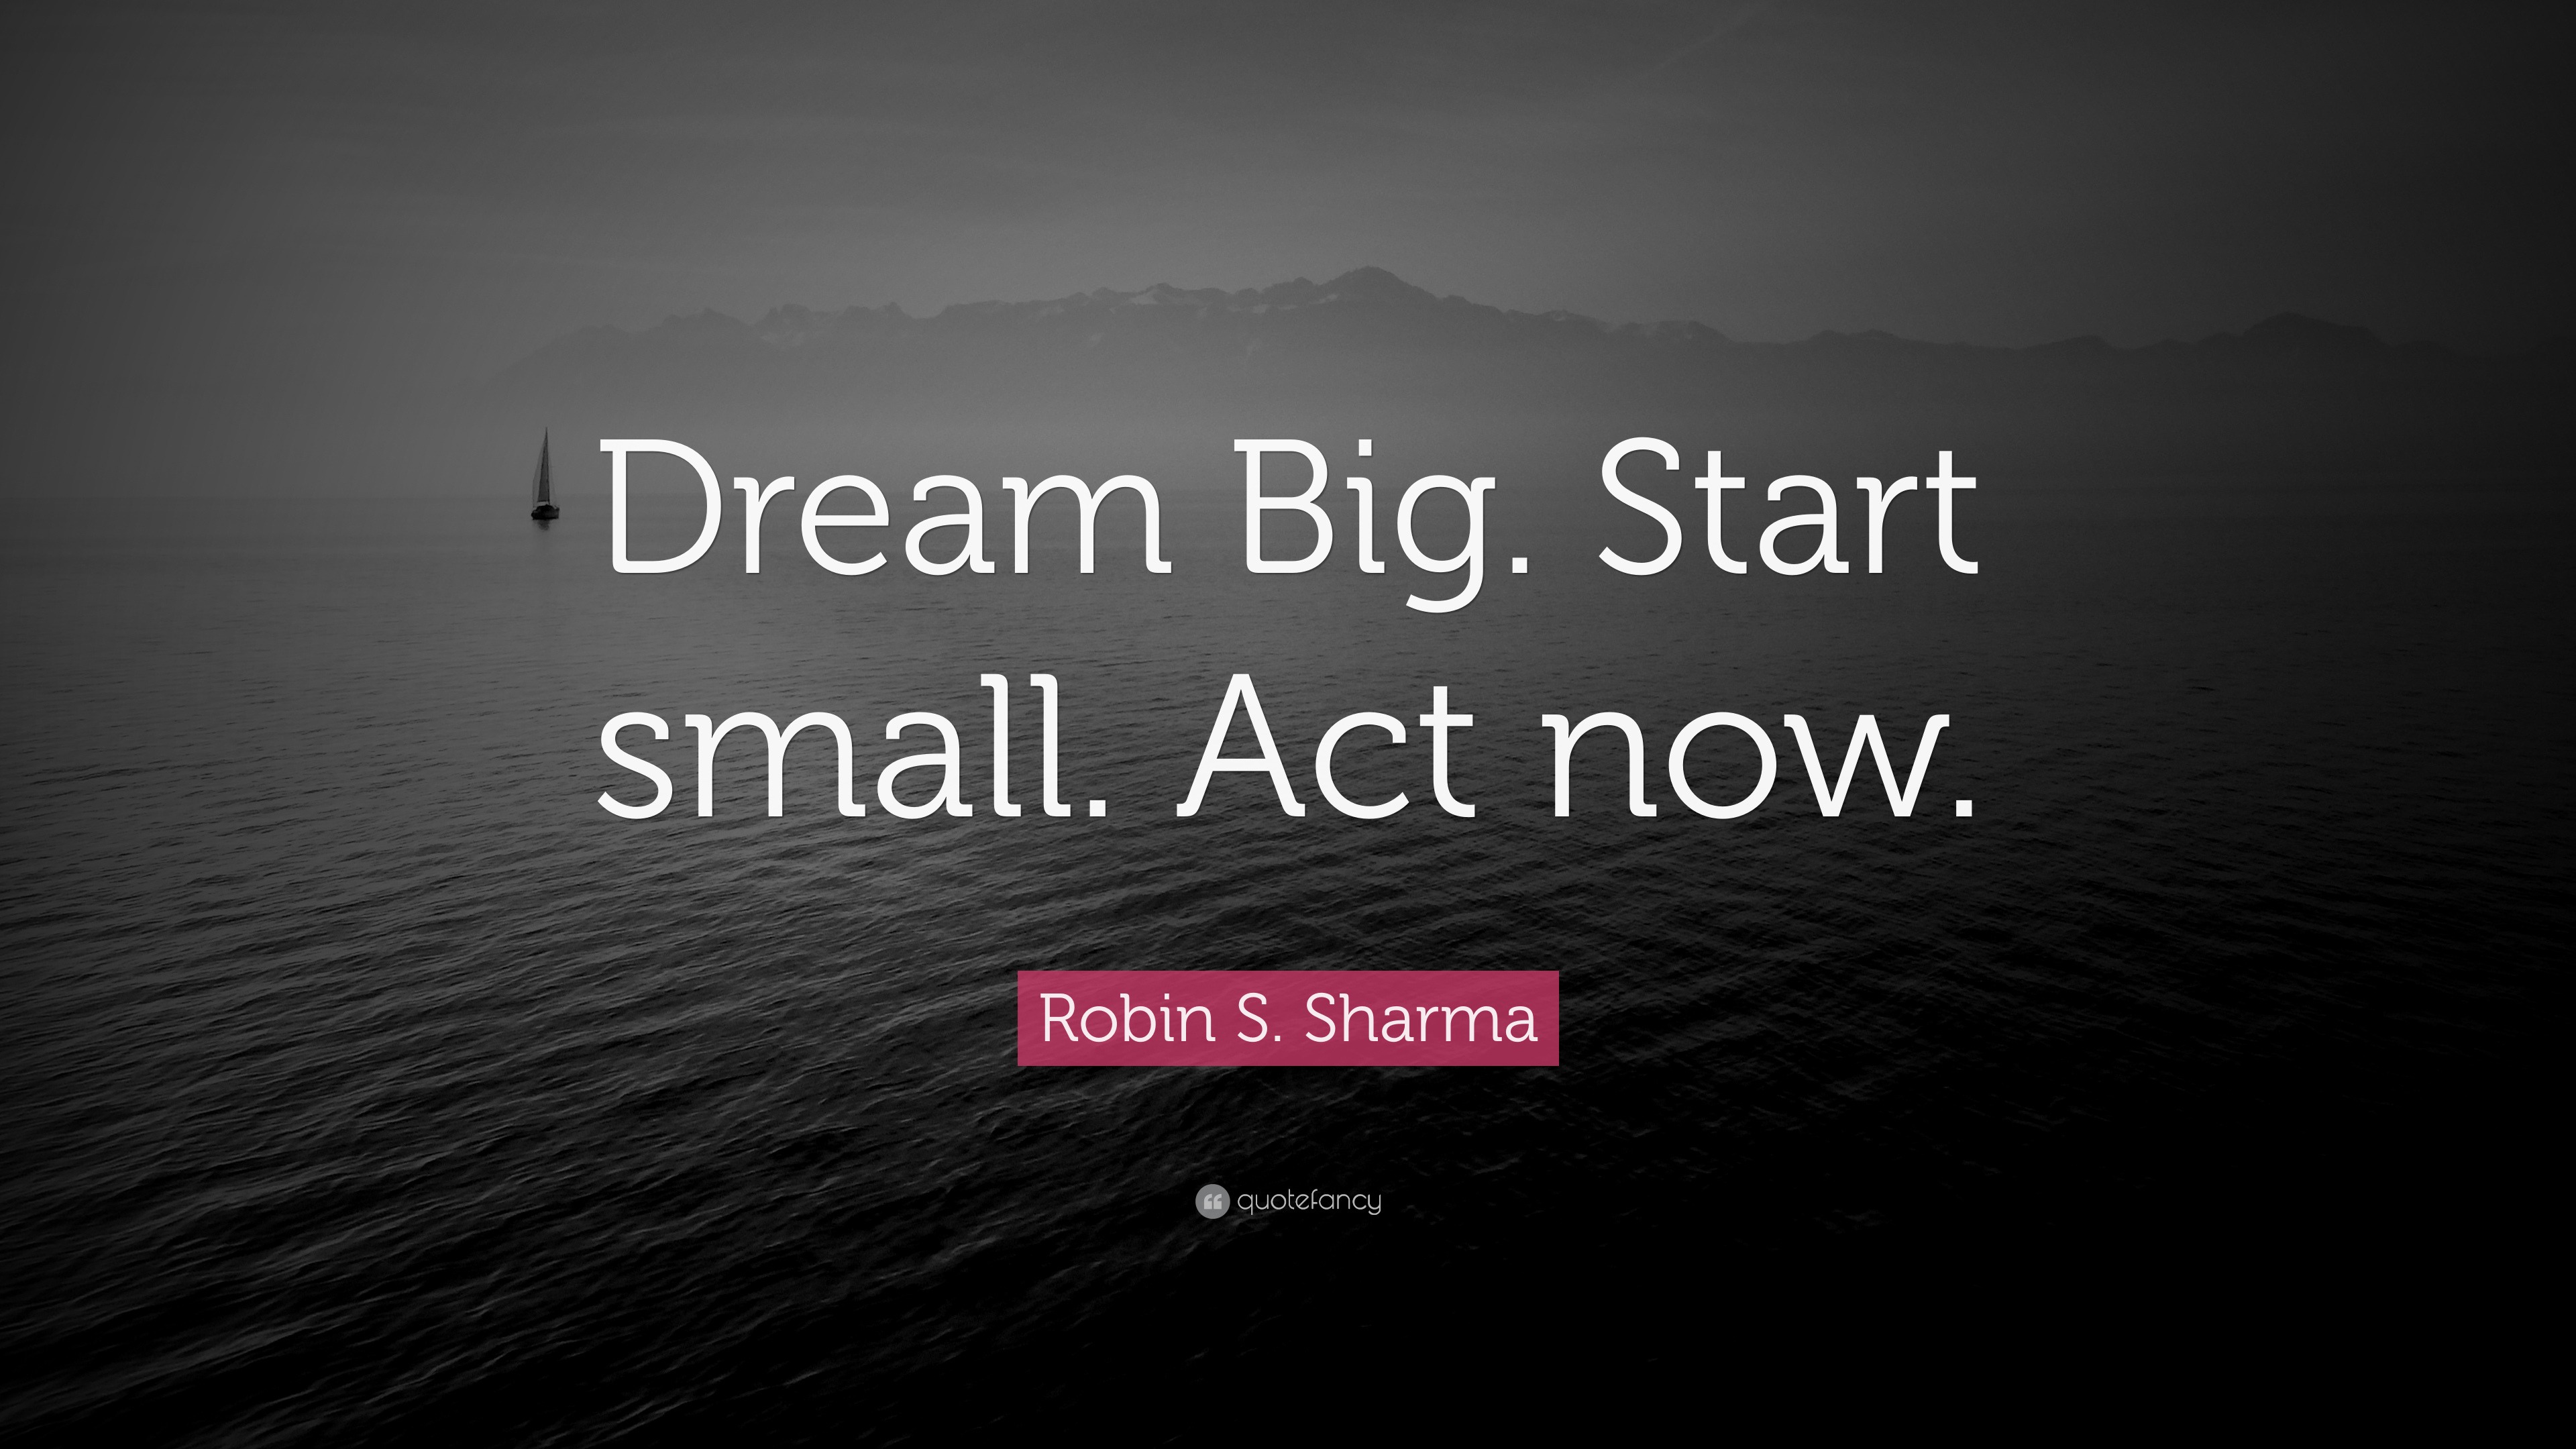 Robin S. Sharma Quote: “Dream Big. Start small. Act now.”